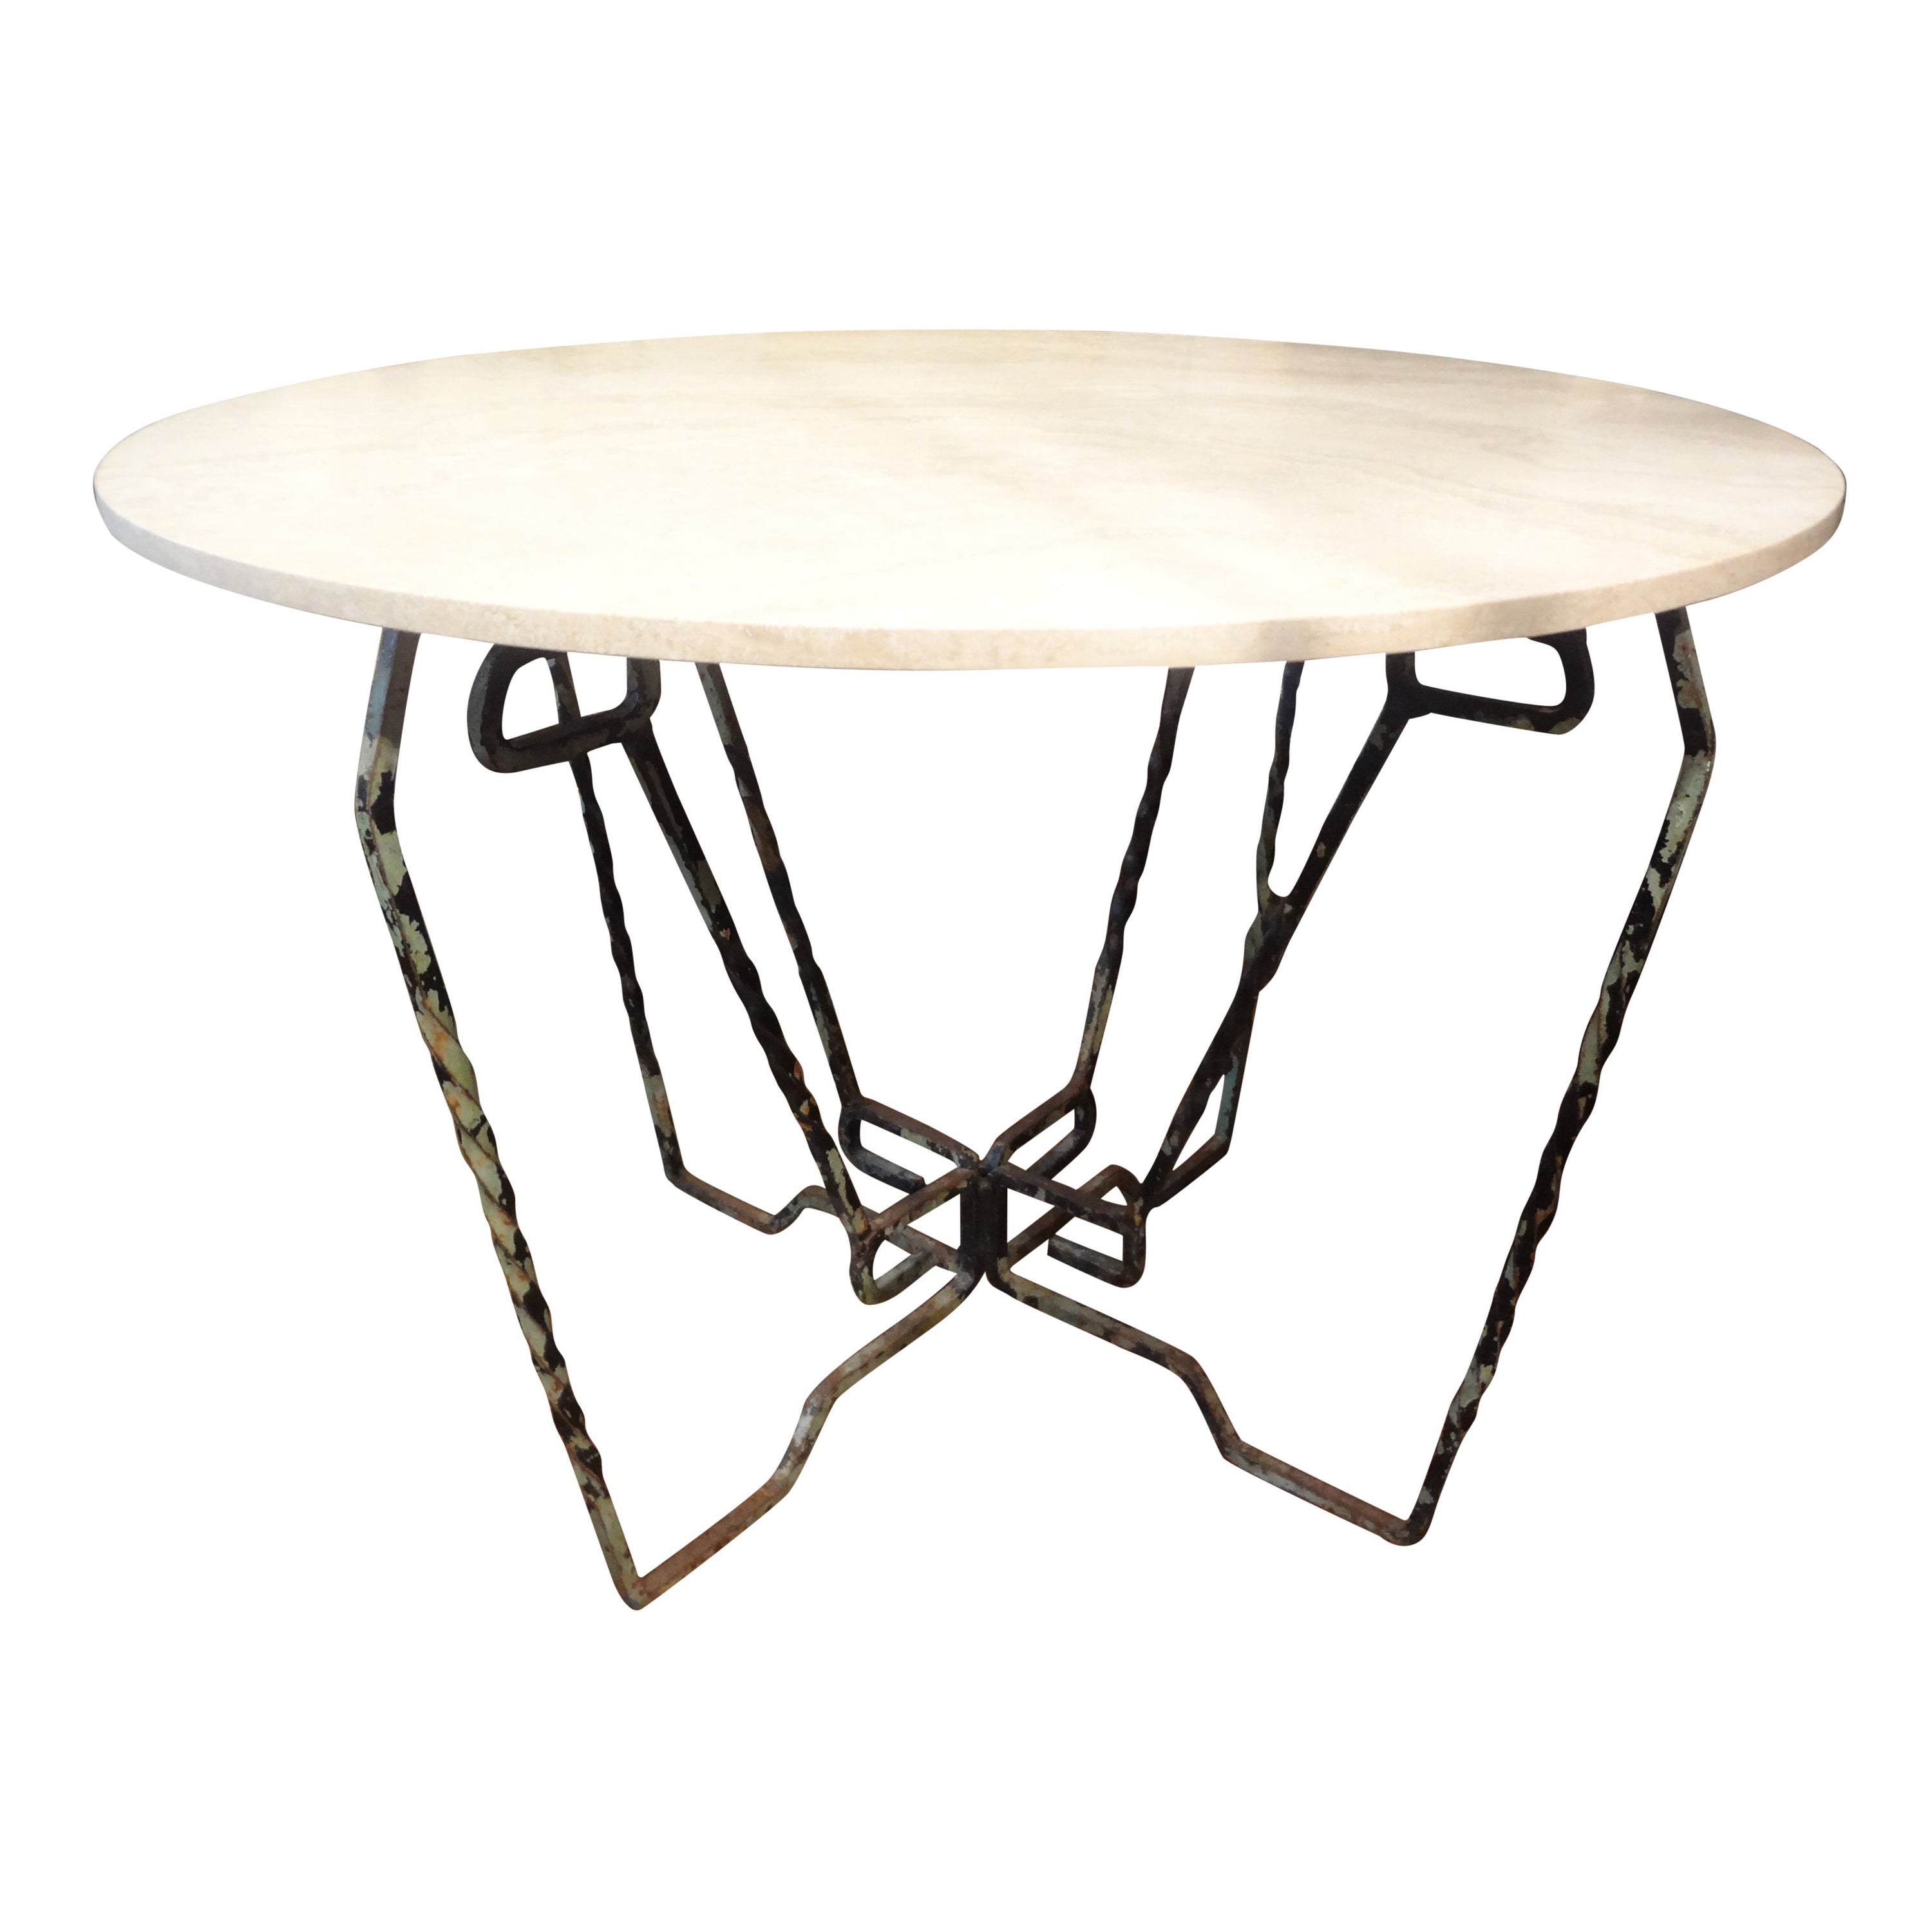 French Wrought Iron Table with Travertine Top